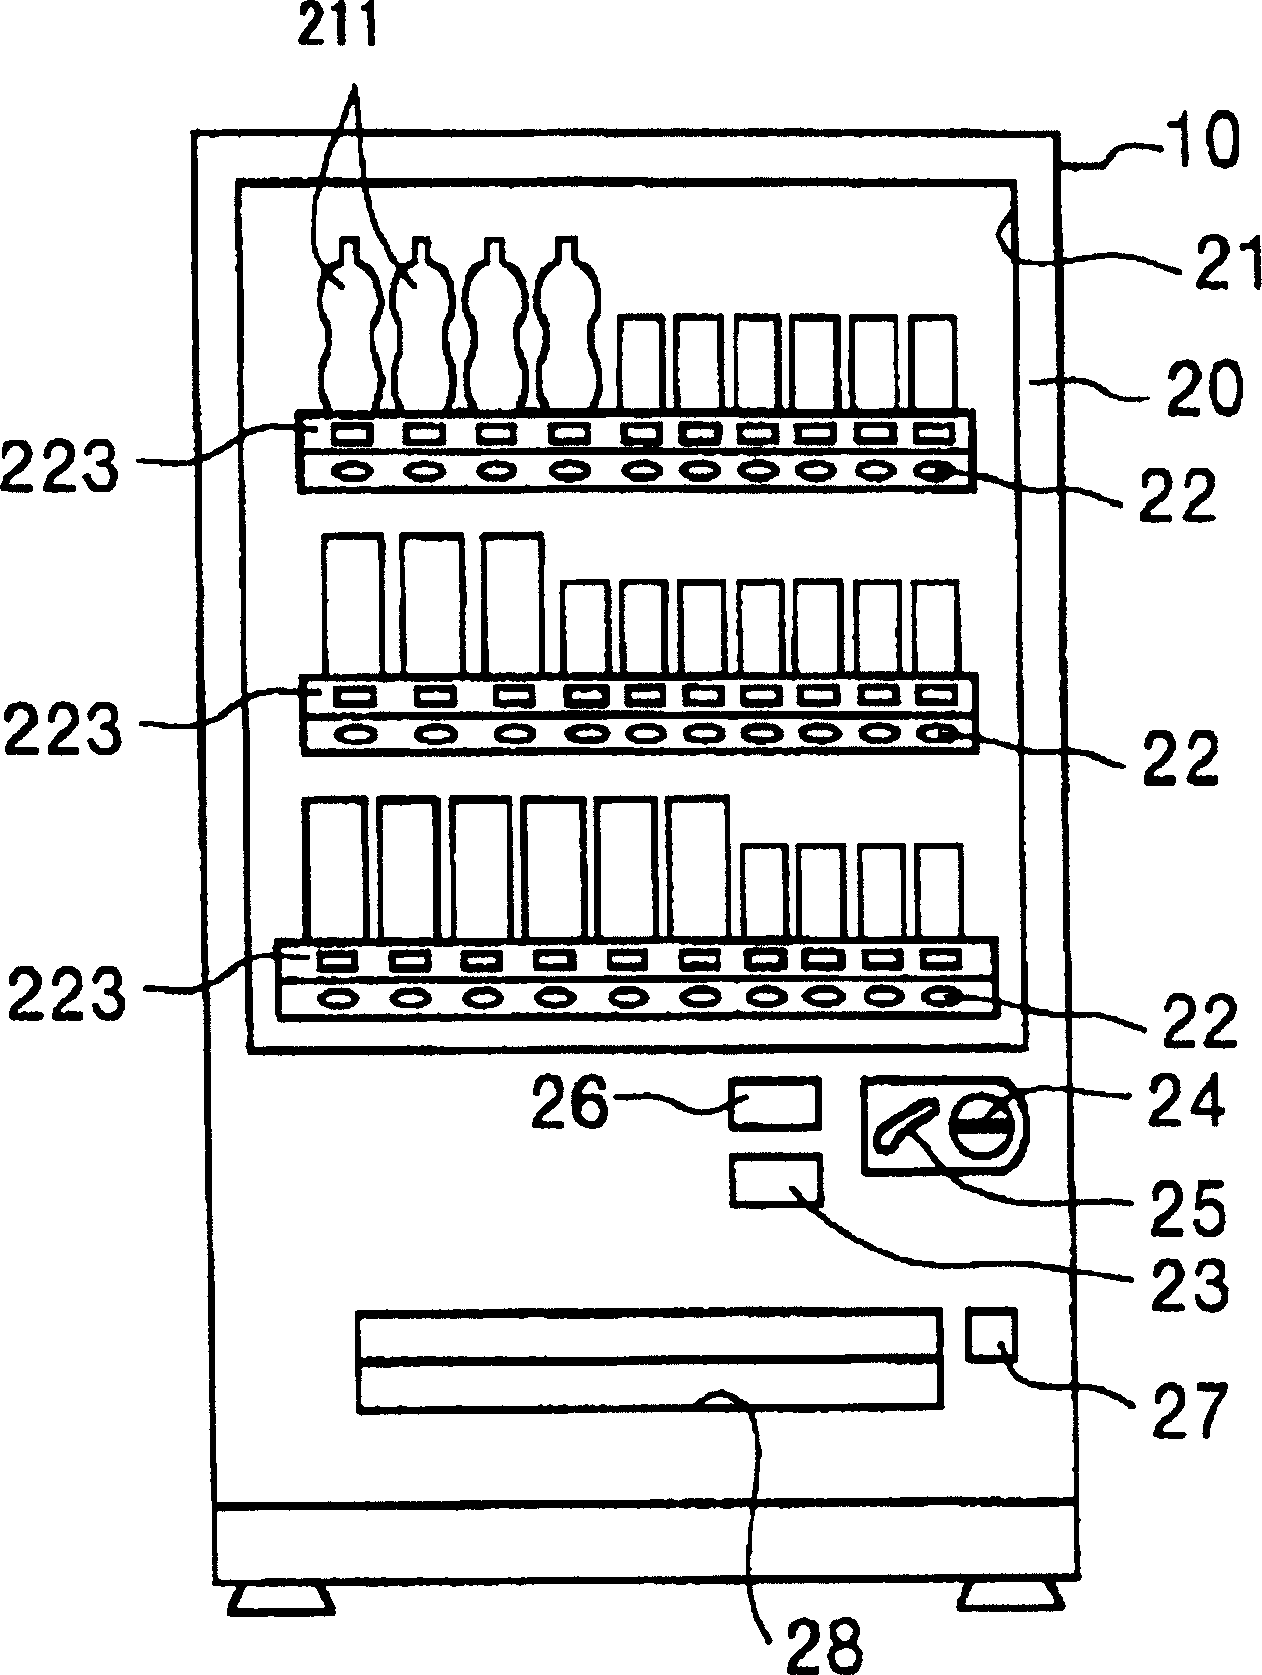 Automat and card controlling part used in automat